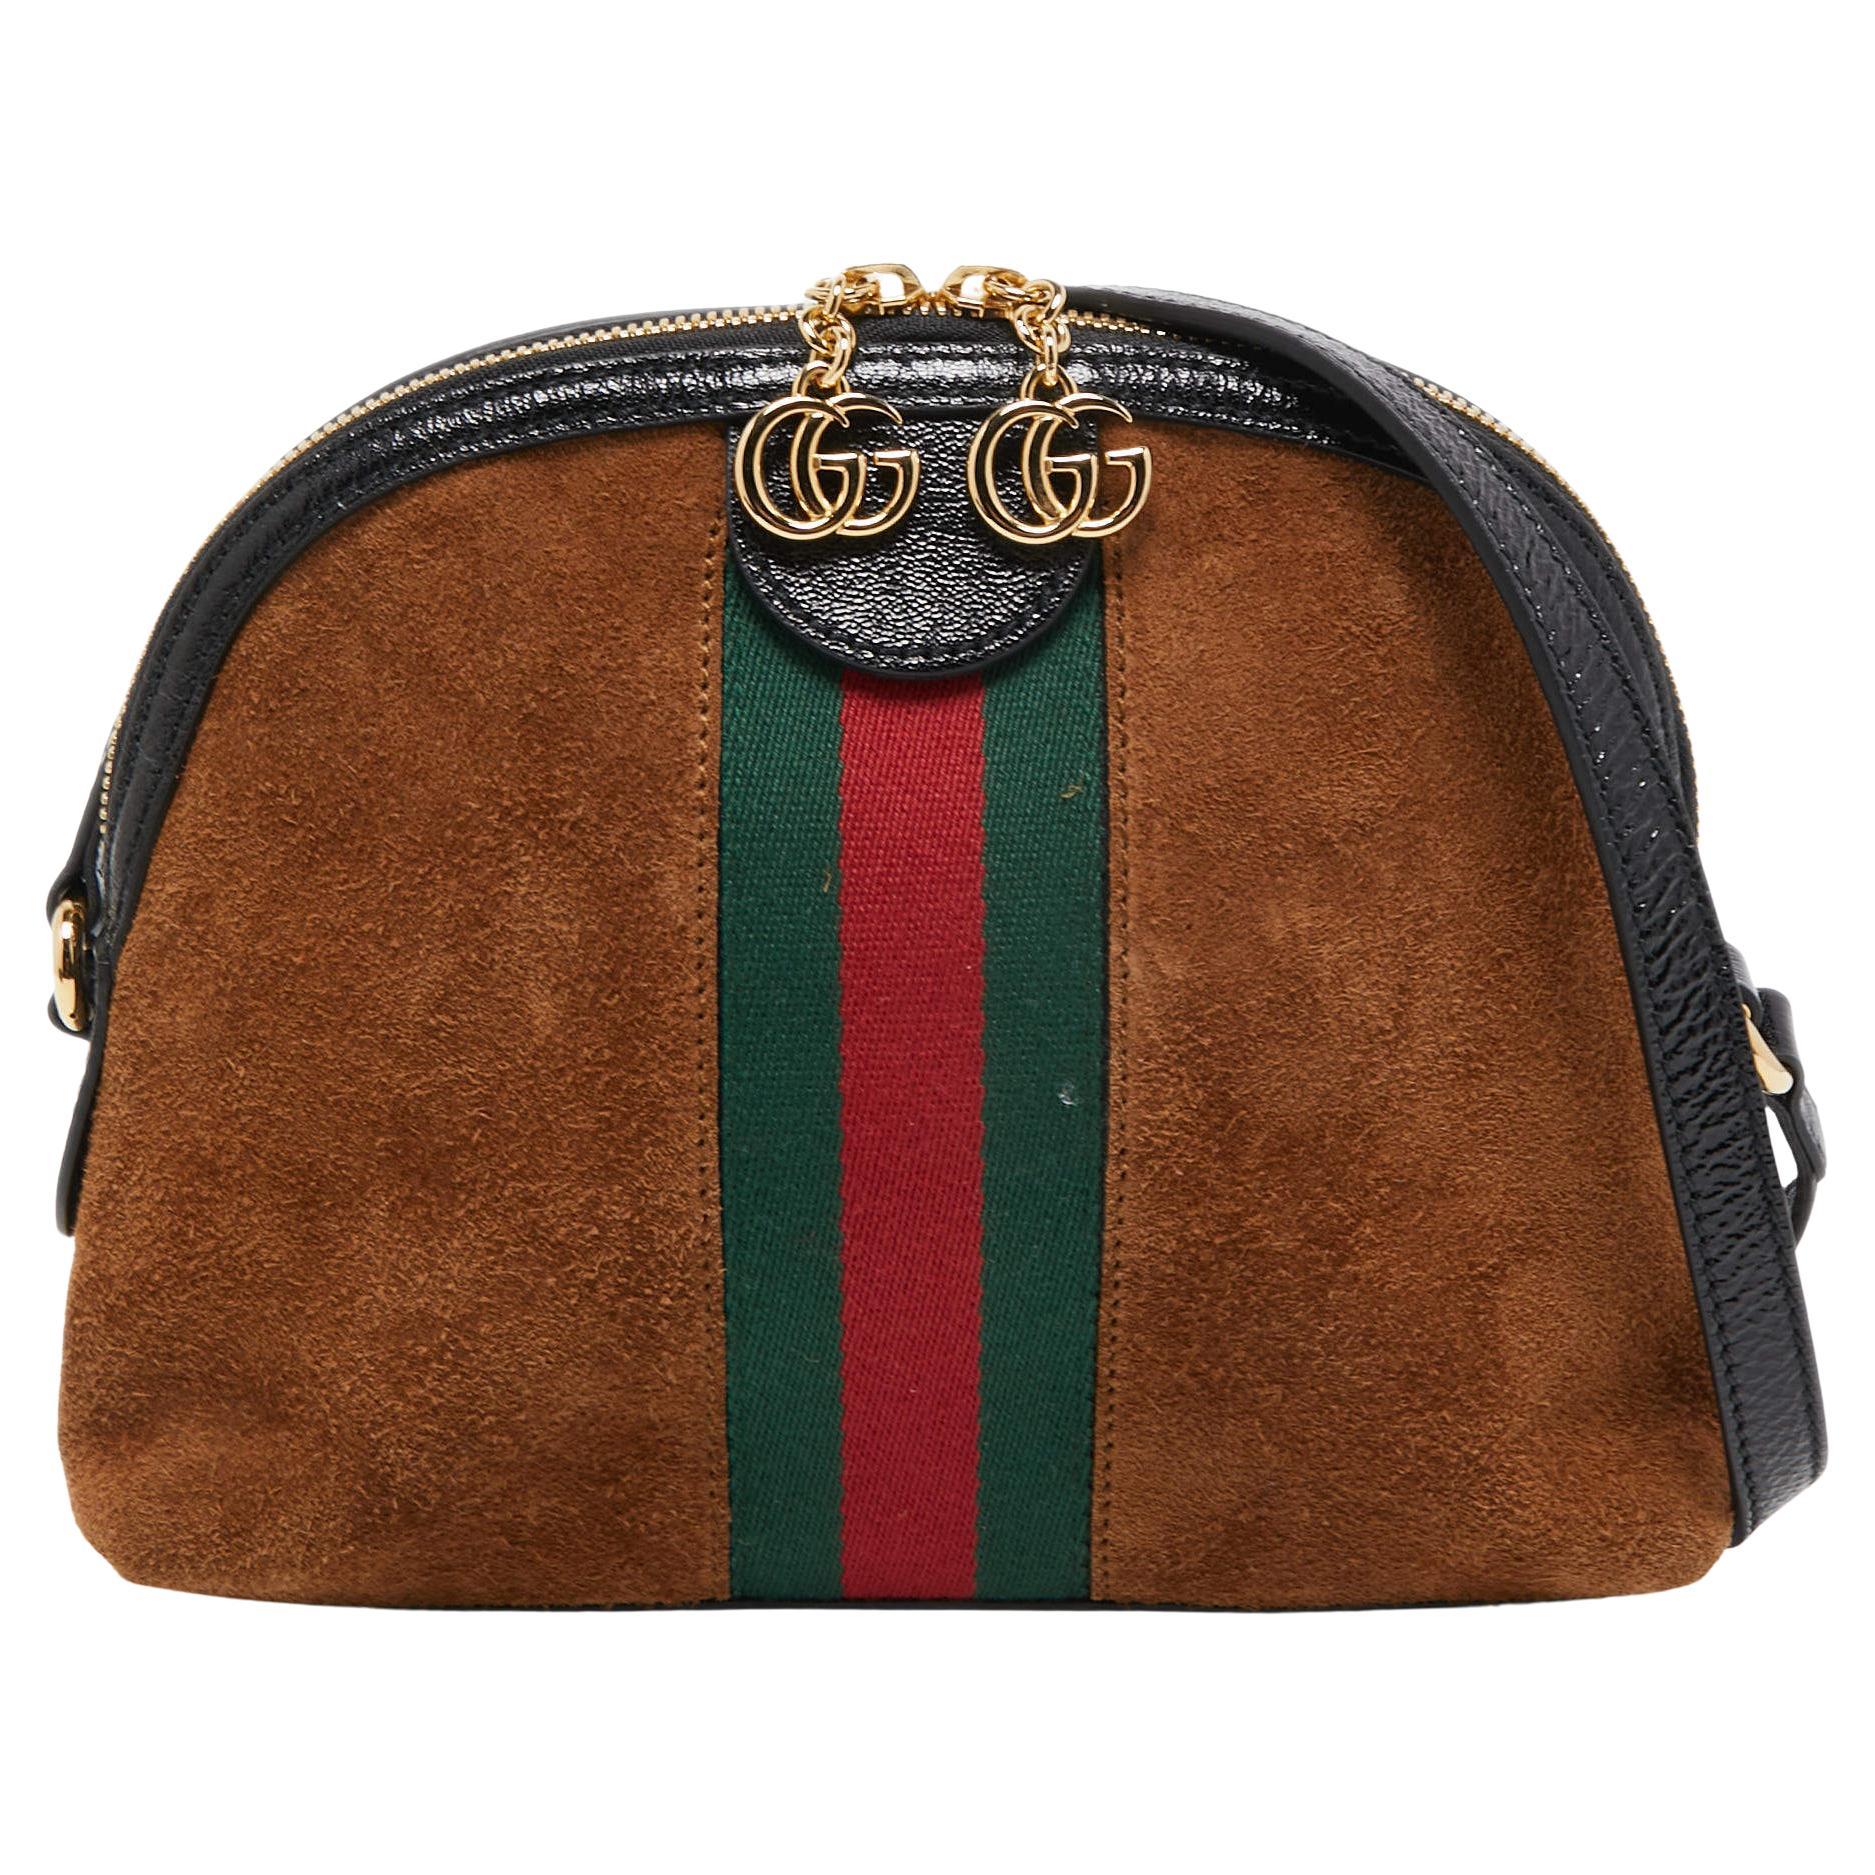 Gucci Brown Suede and Leather Small Web Ophidia GG Shoulder Bag